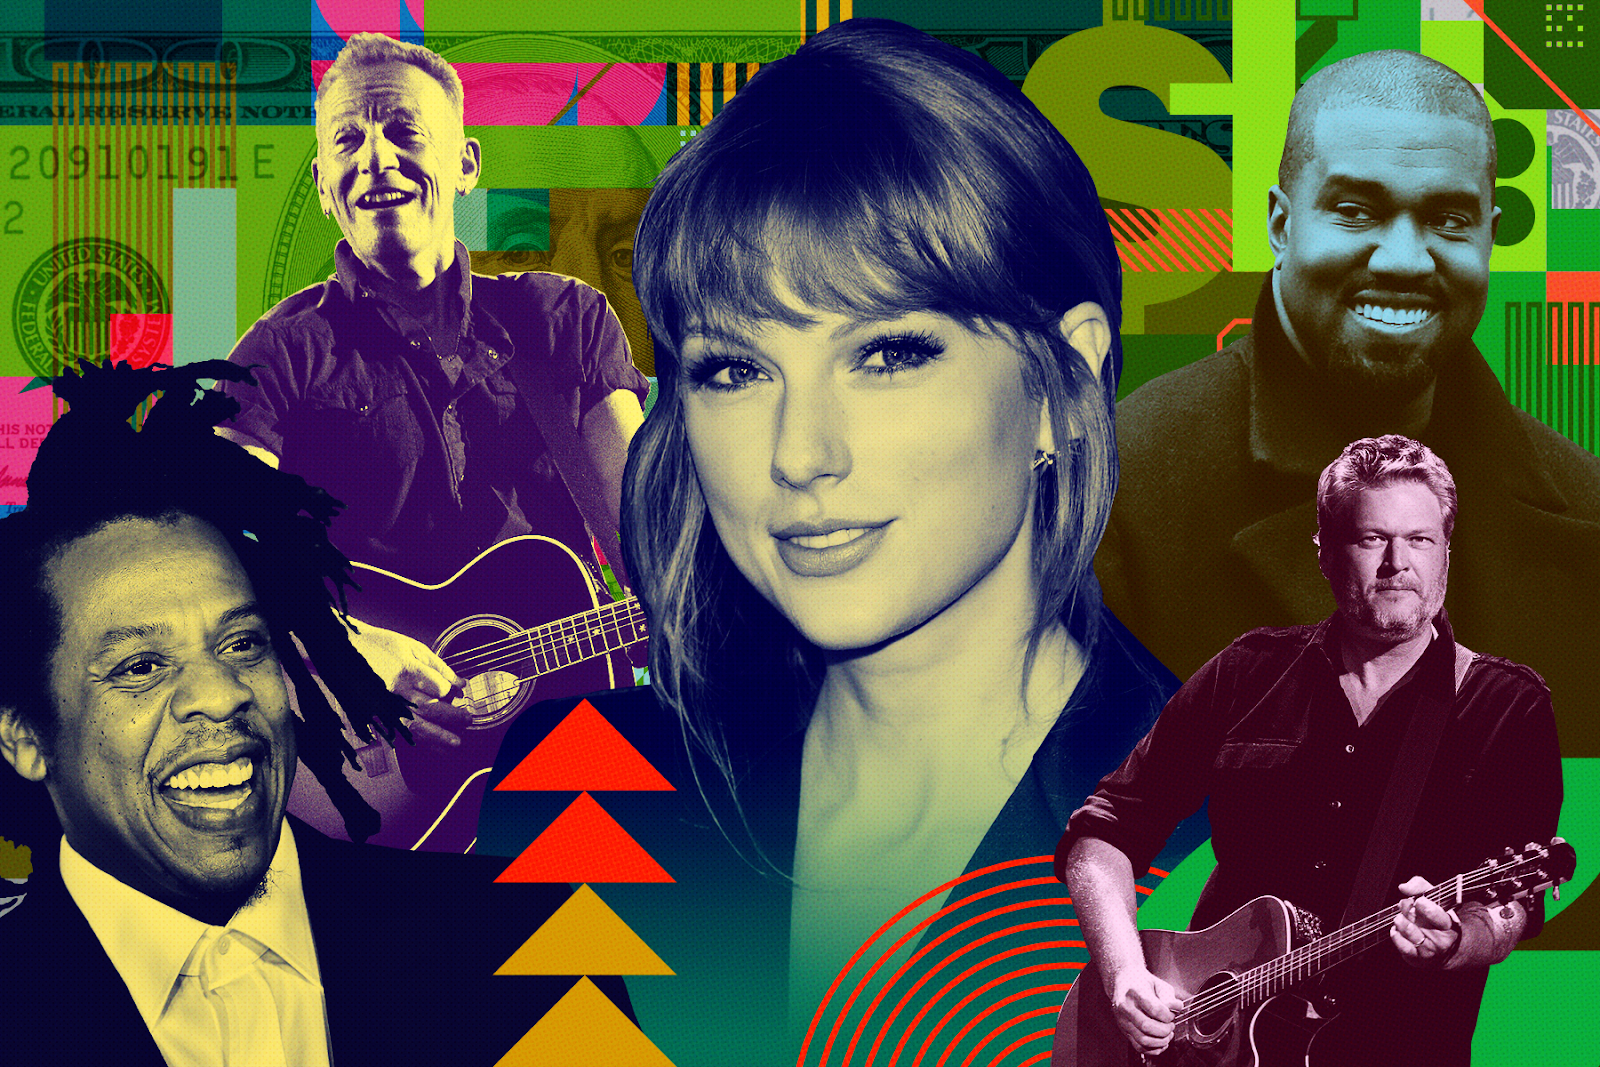 https://www.rollingstone.com/music/music-lists/highest-paid-musicians-2021-bruce-springsteen-jay-z-taylor-swift-1281654/